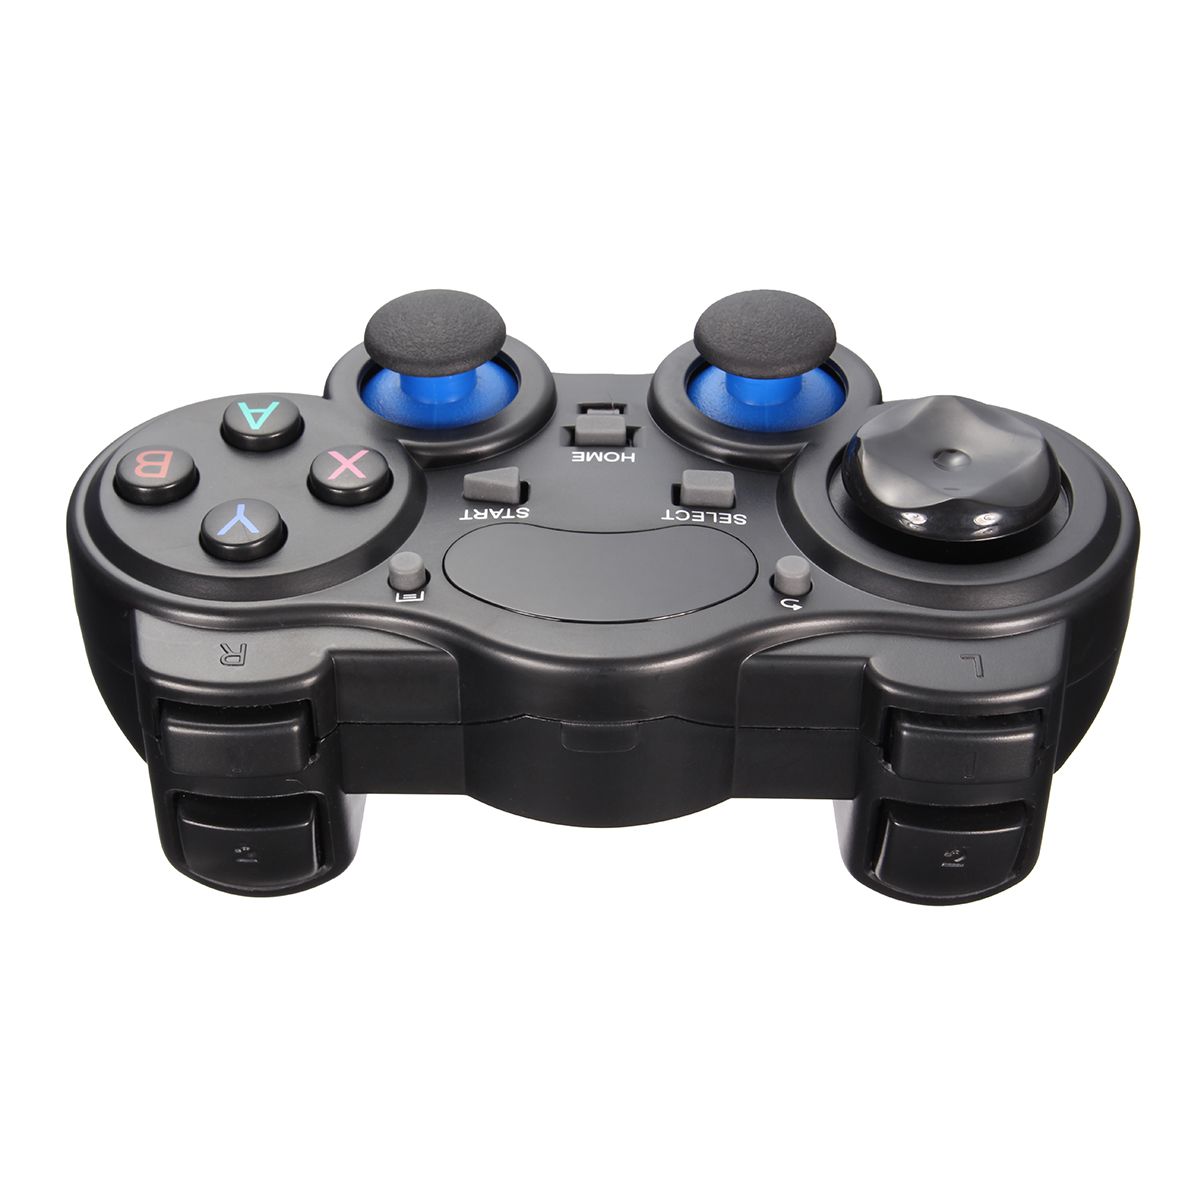 24GHz-Wireless-Game-Controller-Gamepad-Joystick-For-Android-TV-Box-PC-1143410